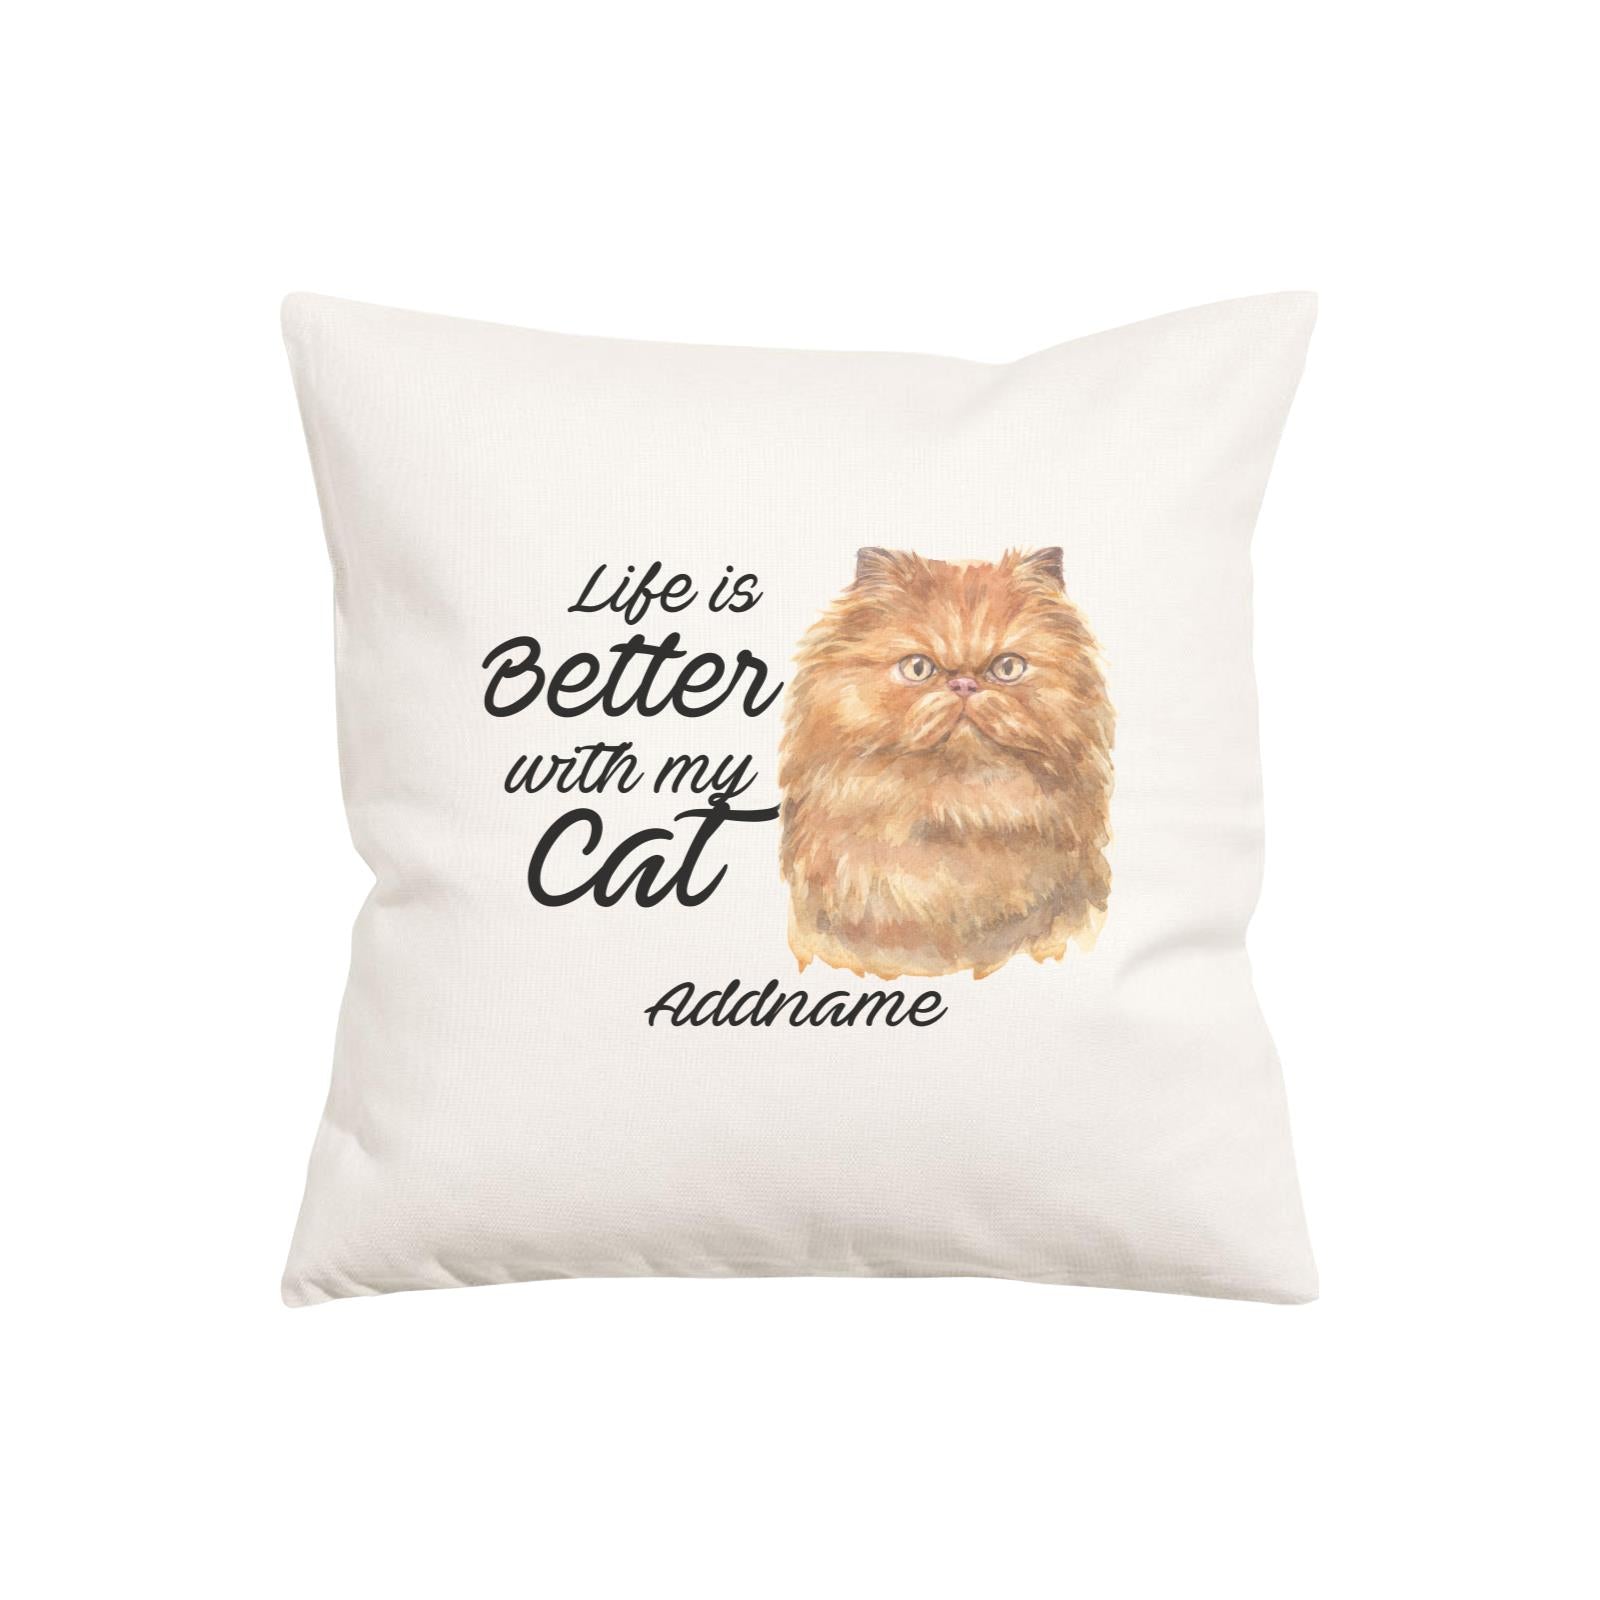 Watercolor Life is Better With My Cat Persian Brown cat Addname Pillow Cushion